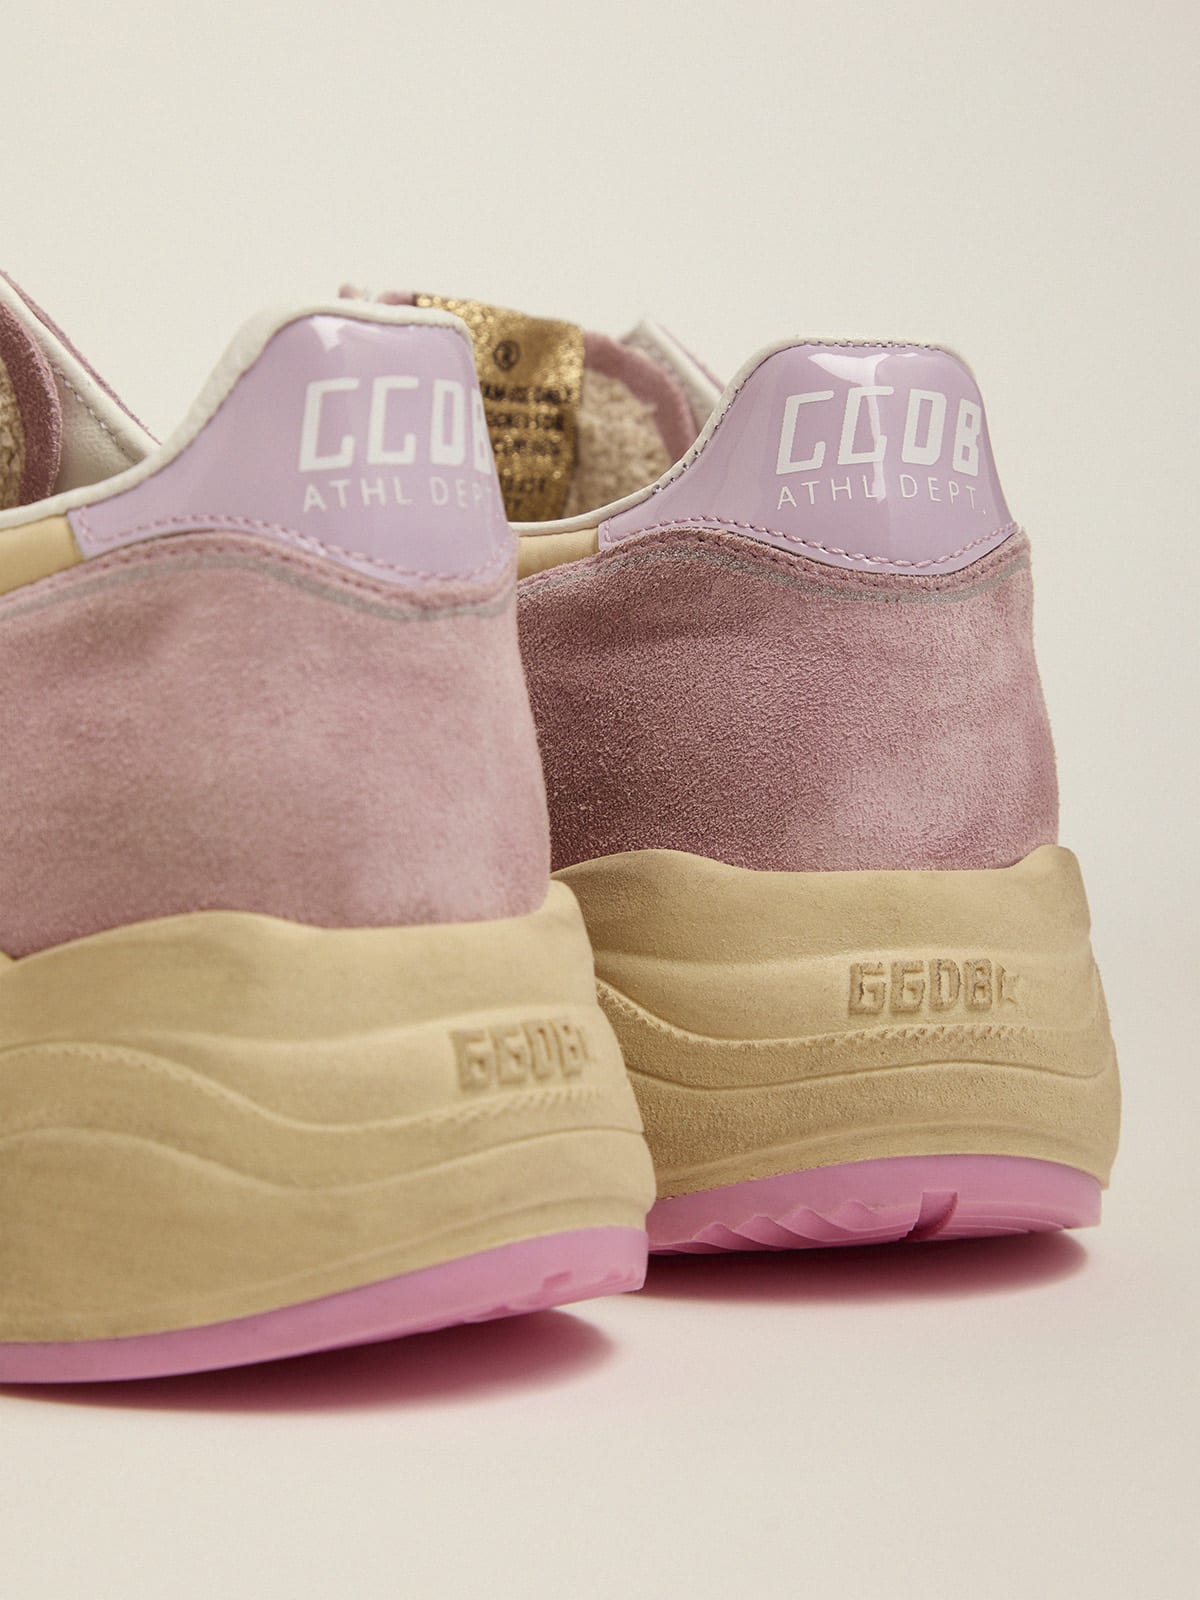 Pastel pink Running Sole sneakers with white star | Golden Goose